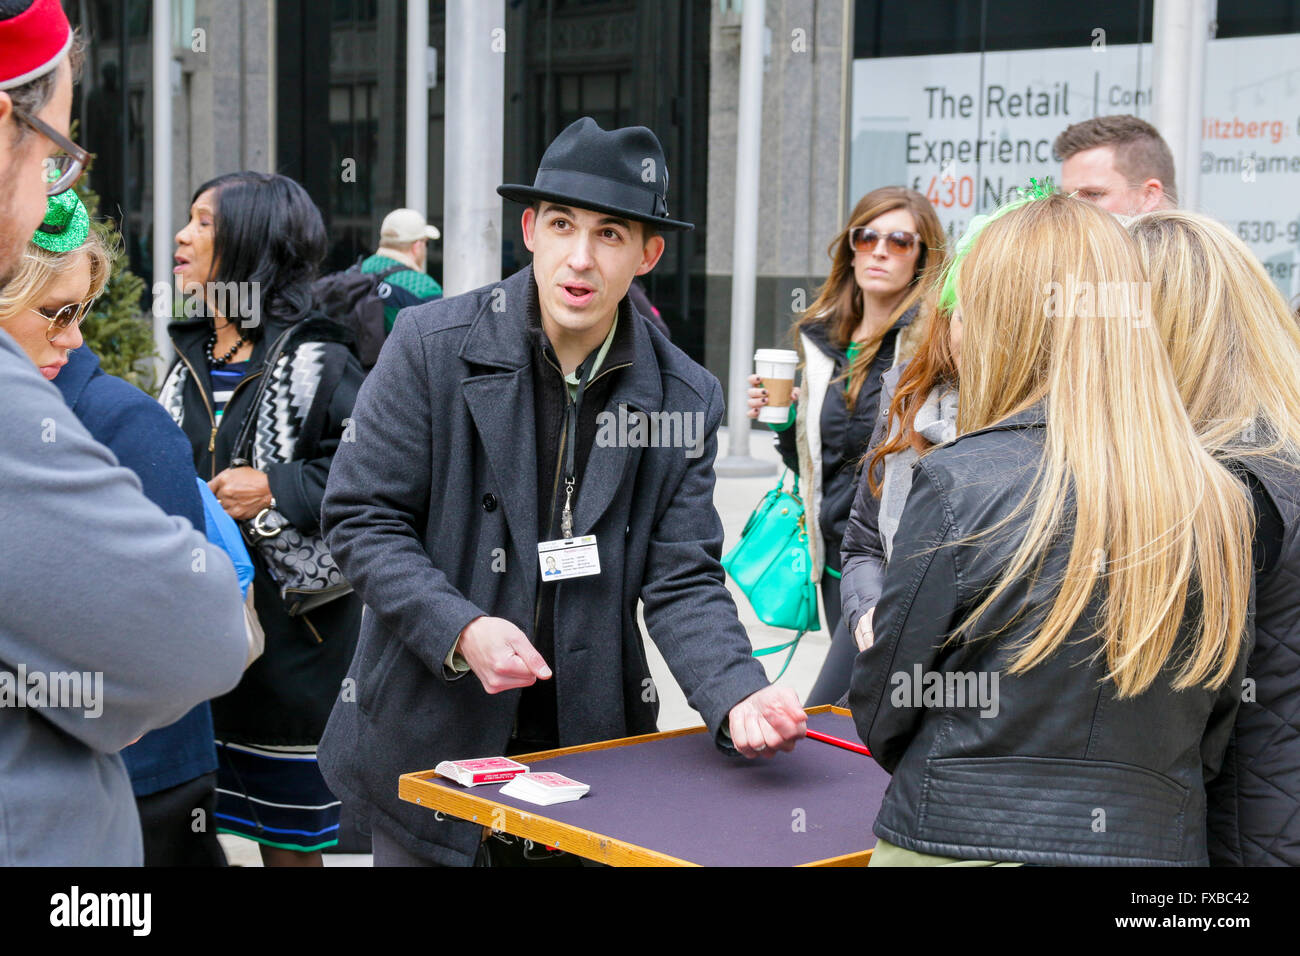 Street performer/magician doing card trick. Chicago, Illinois. Stock Photo